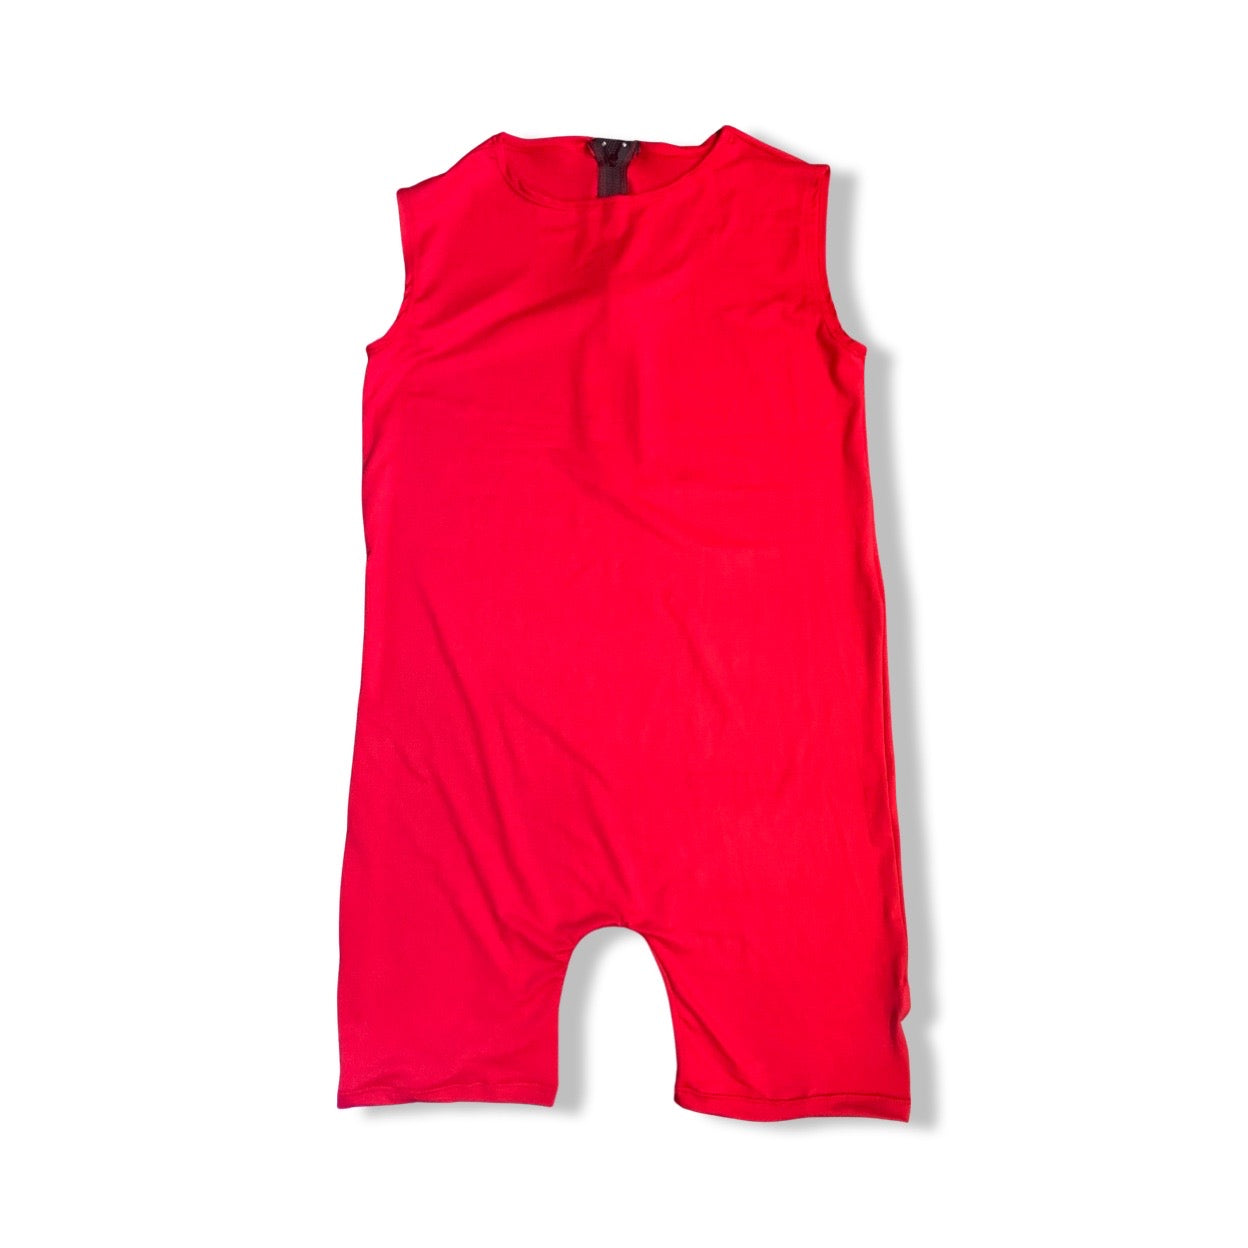 A cute red baby romper with a pocket, featuring a zip back bodysuit. Perfect for your little one!